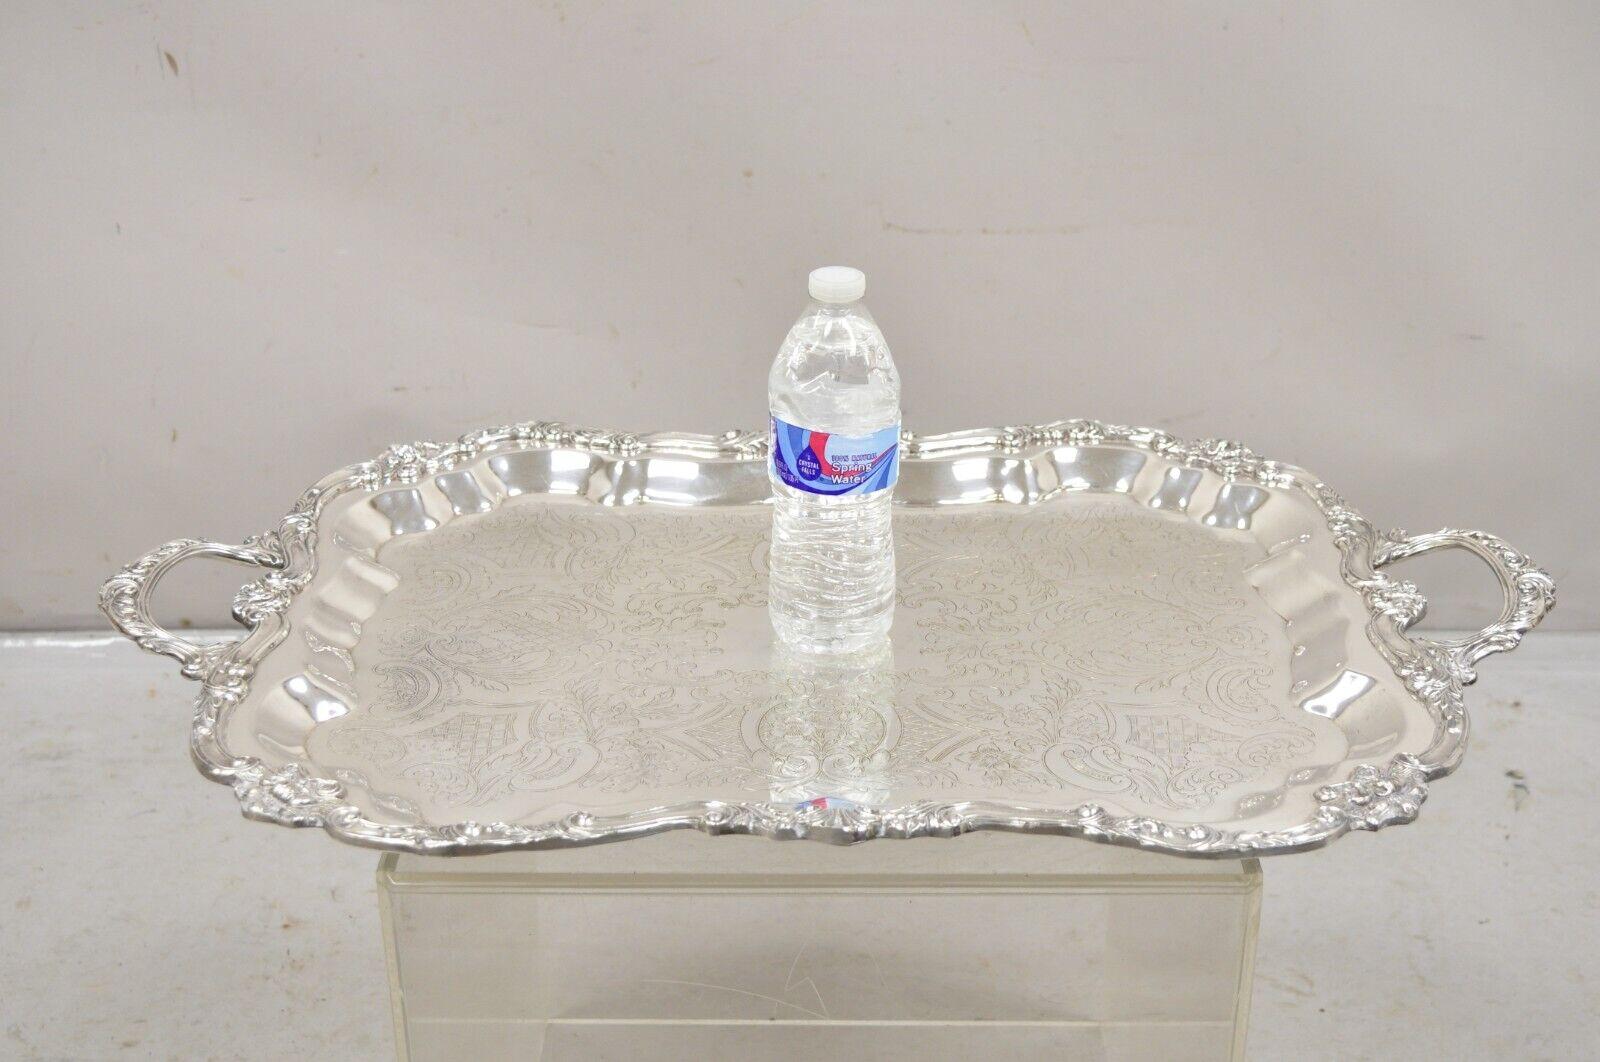 Vintage Sheridan Large Ornate Silver Plated Victorian Style Serving Platter Tray For Sale 6